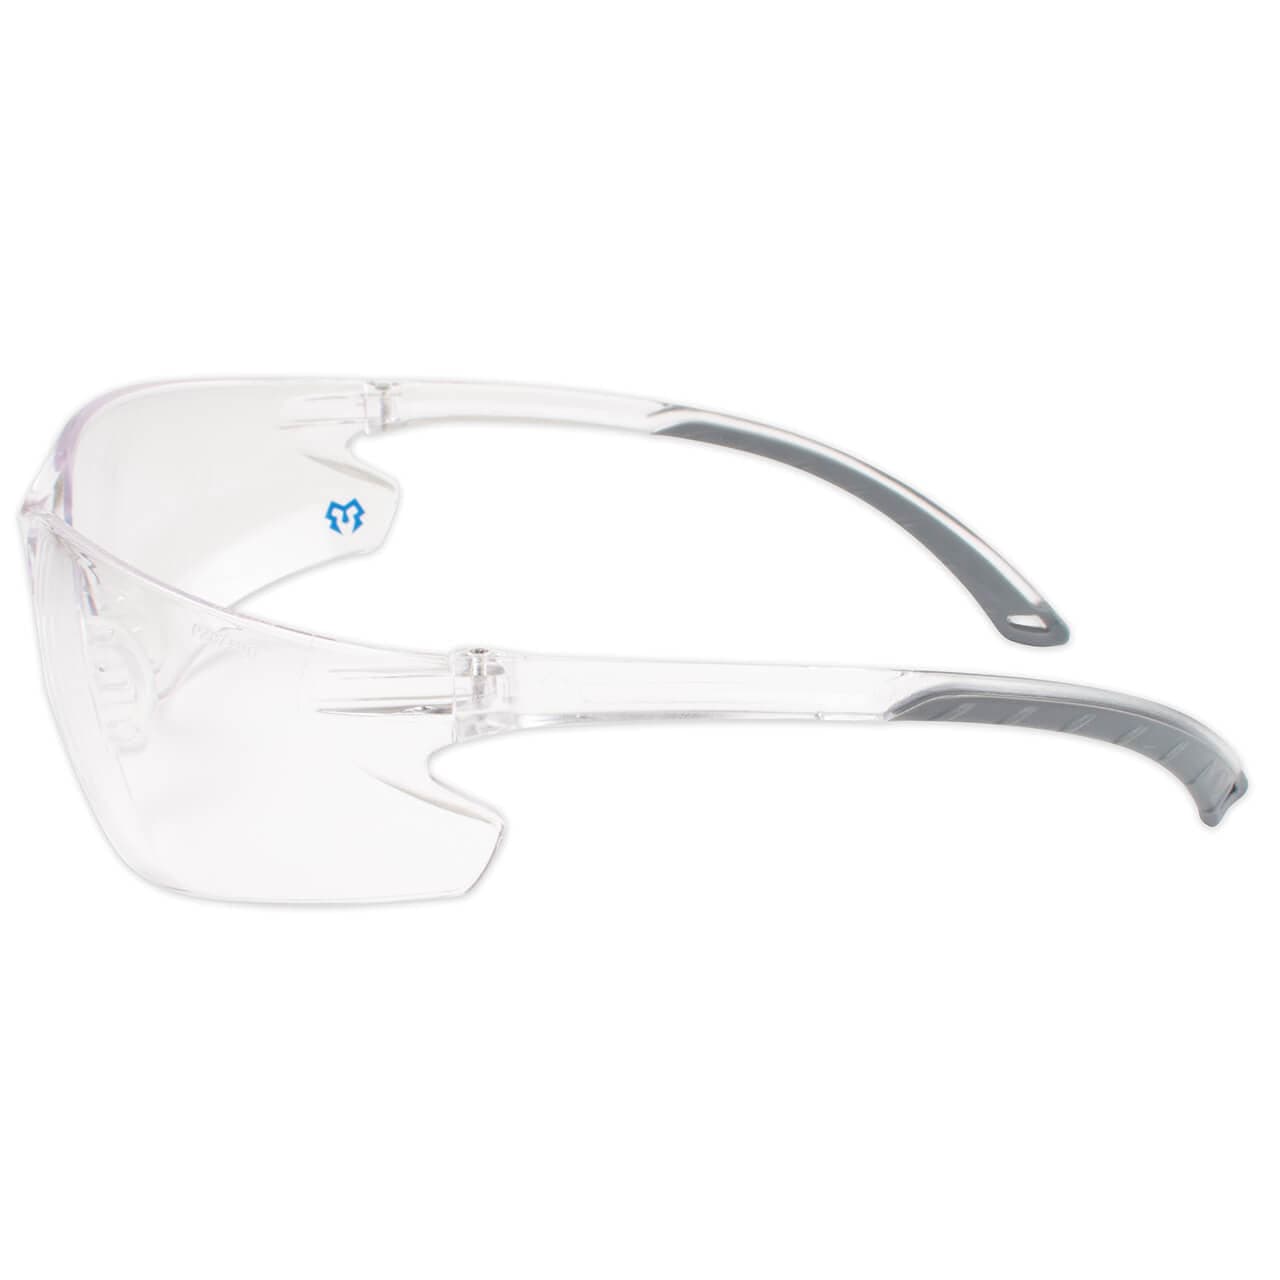 Metel M20 Safety Glasses with Clear Anti-Fog Lenses Side View